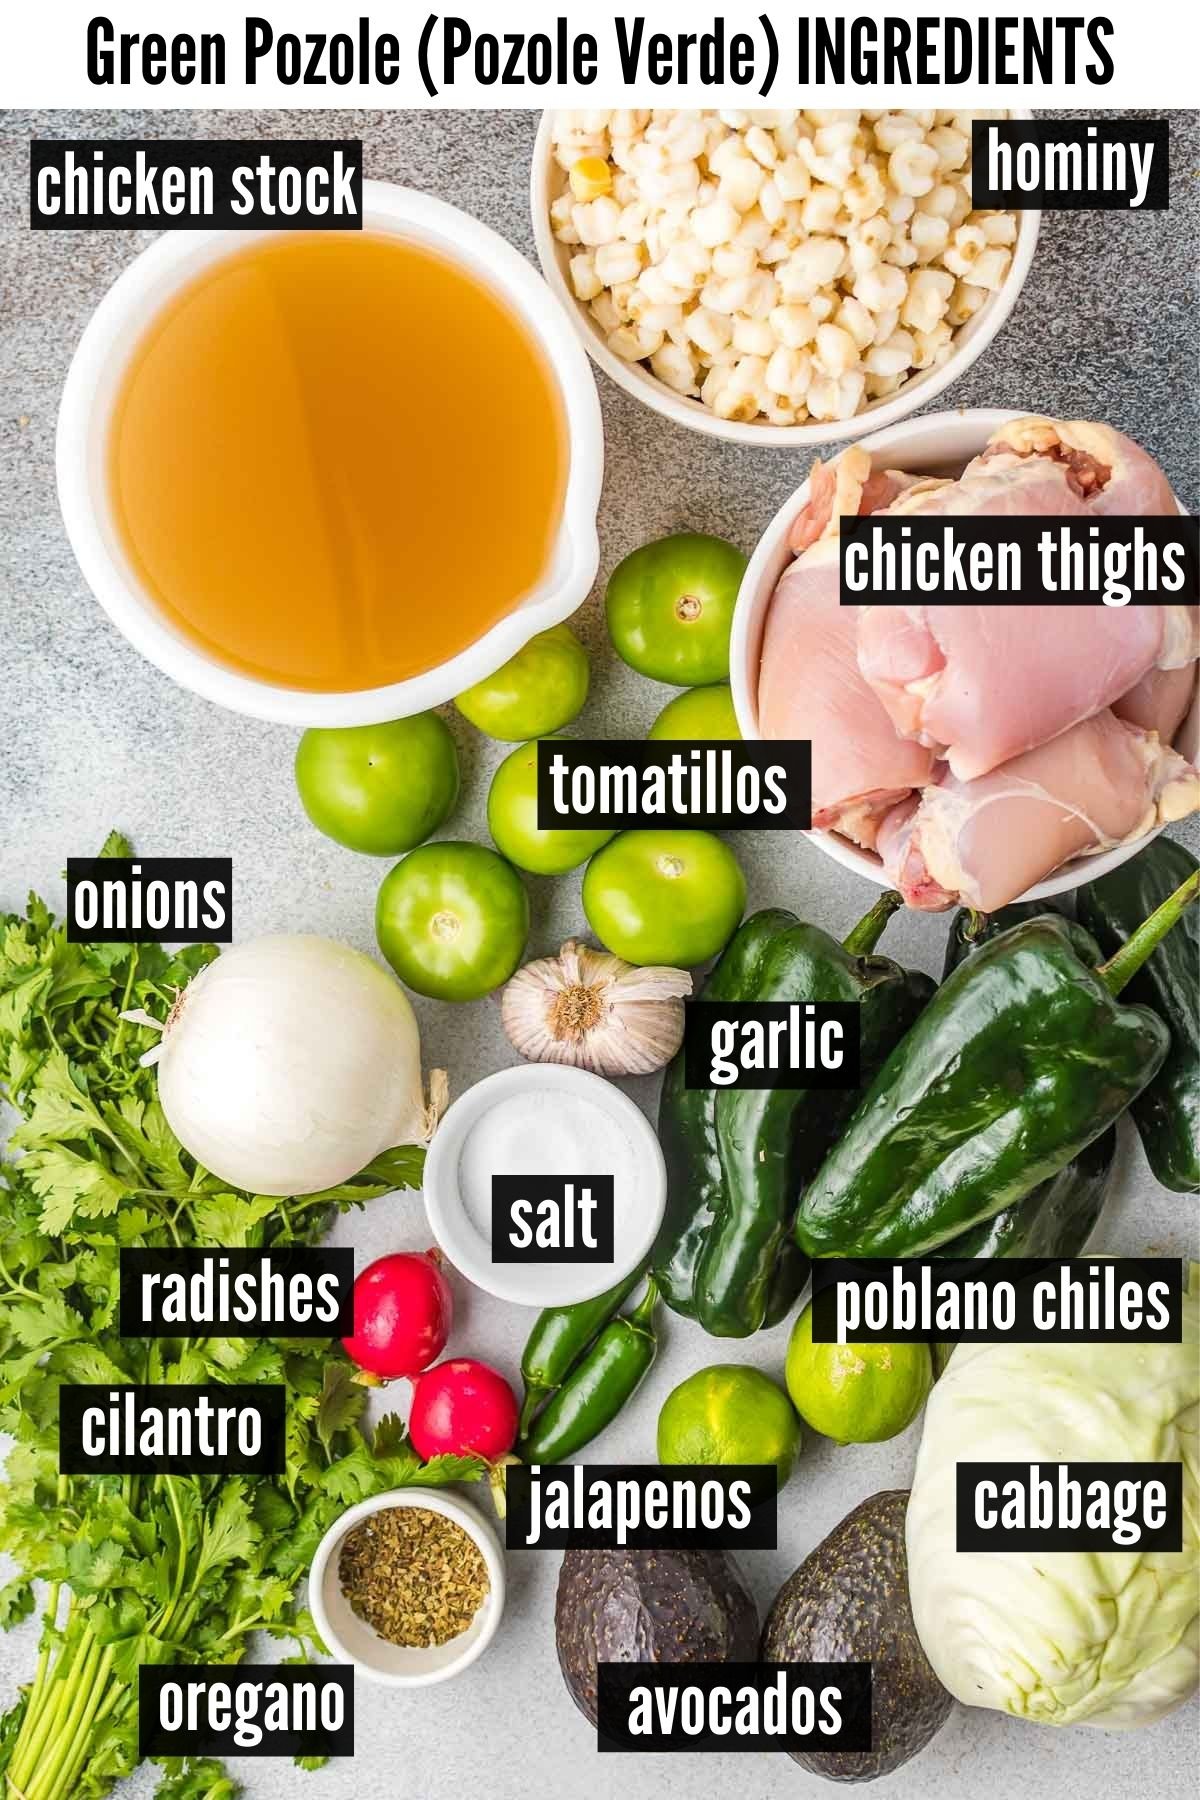 green pozole ingredients labelled